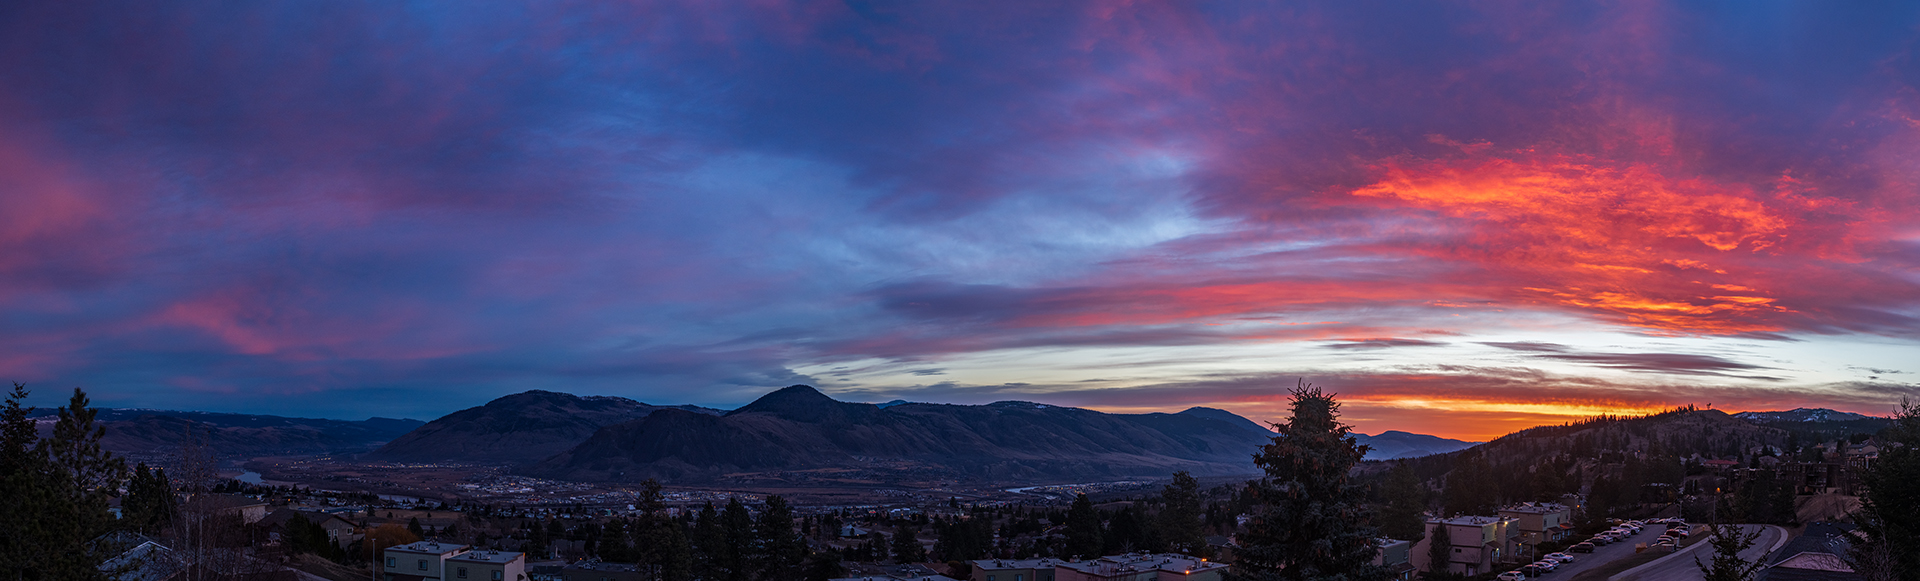 pink and red sunrise with blue sky mountain and city view